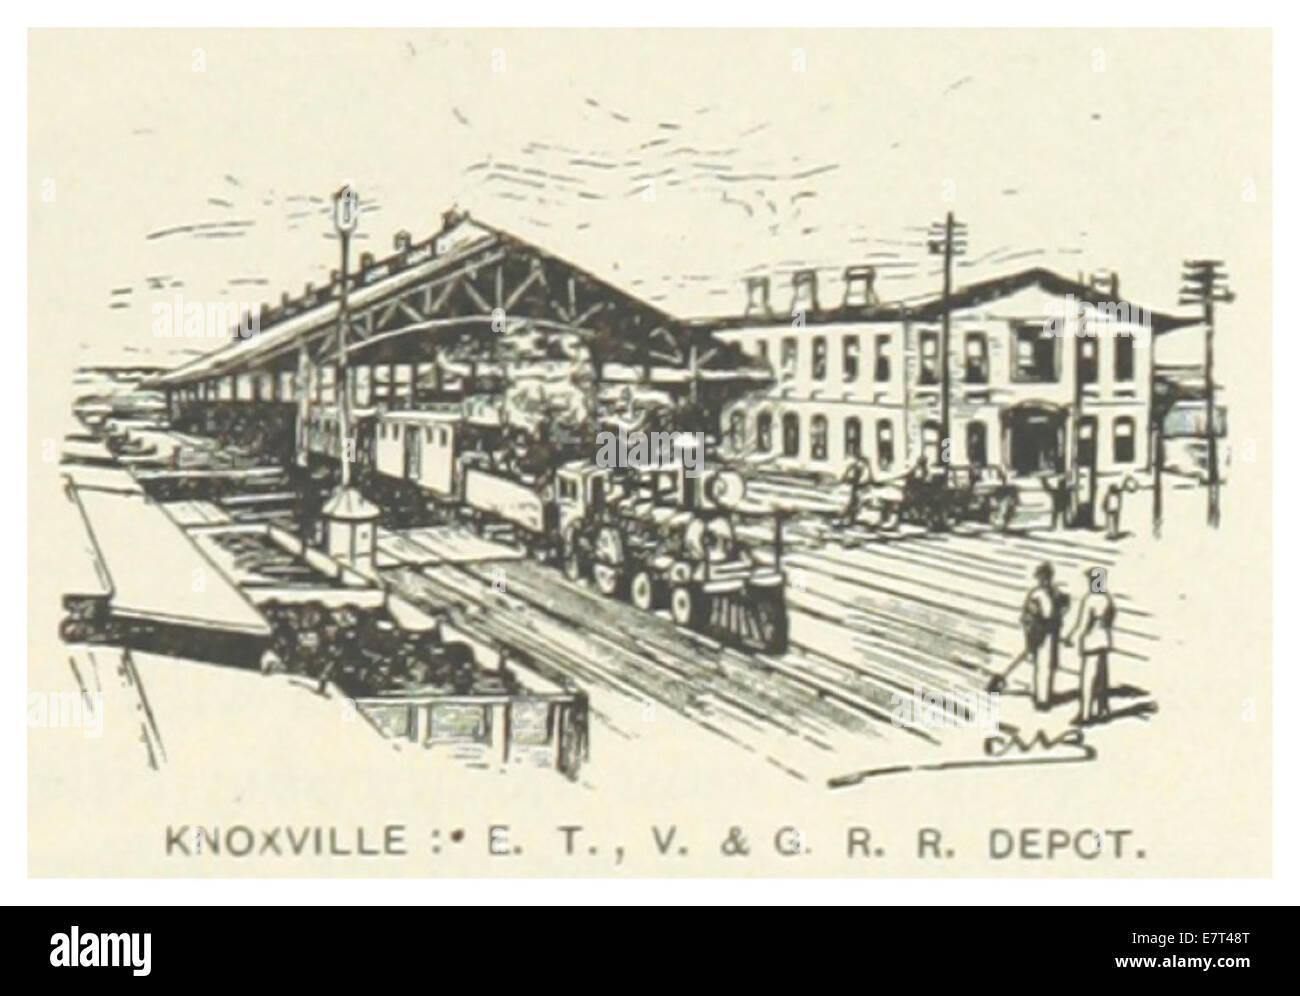 US-TN(1891) p811 KNOXVILLE, THE East-Tennessee, Virginia & Georgia Railroad DEPOT Stock Photo